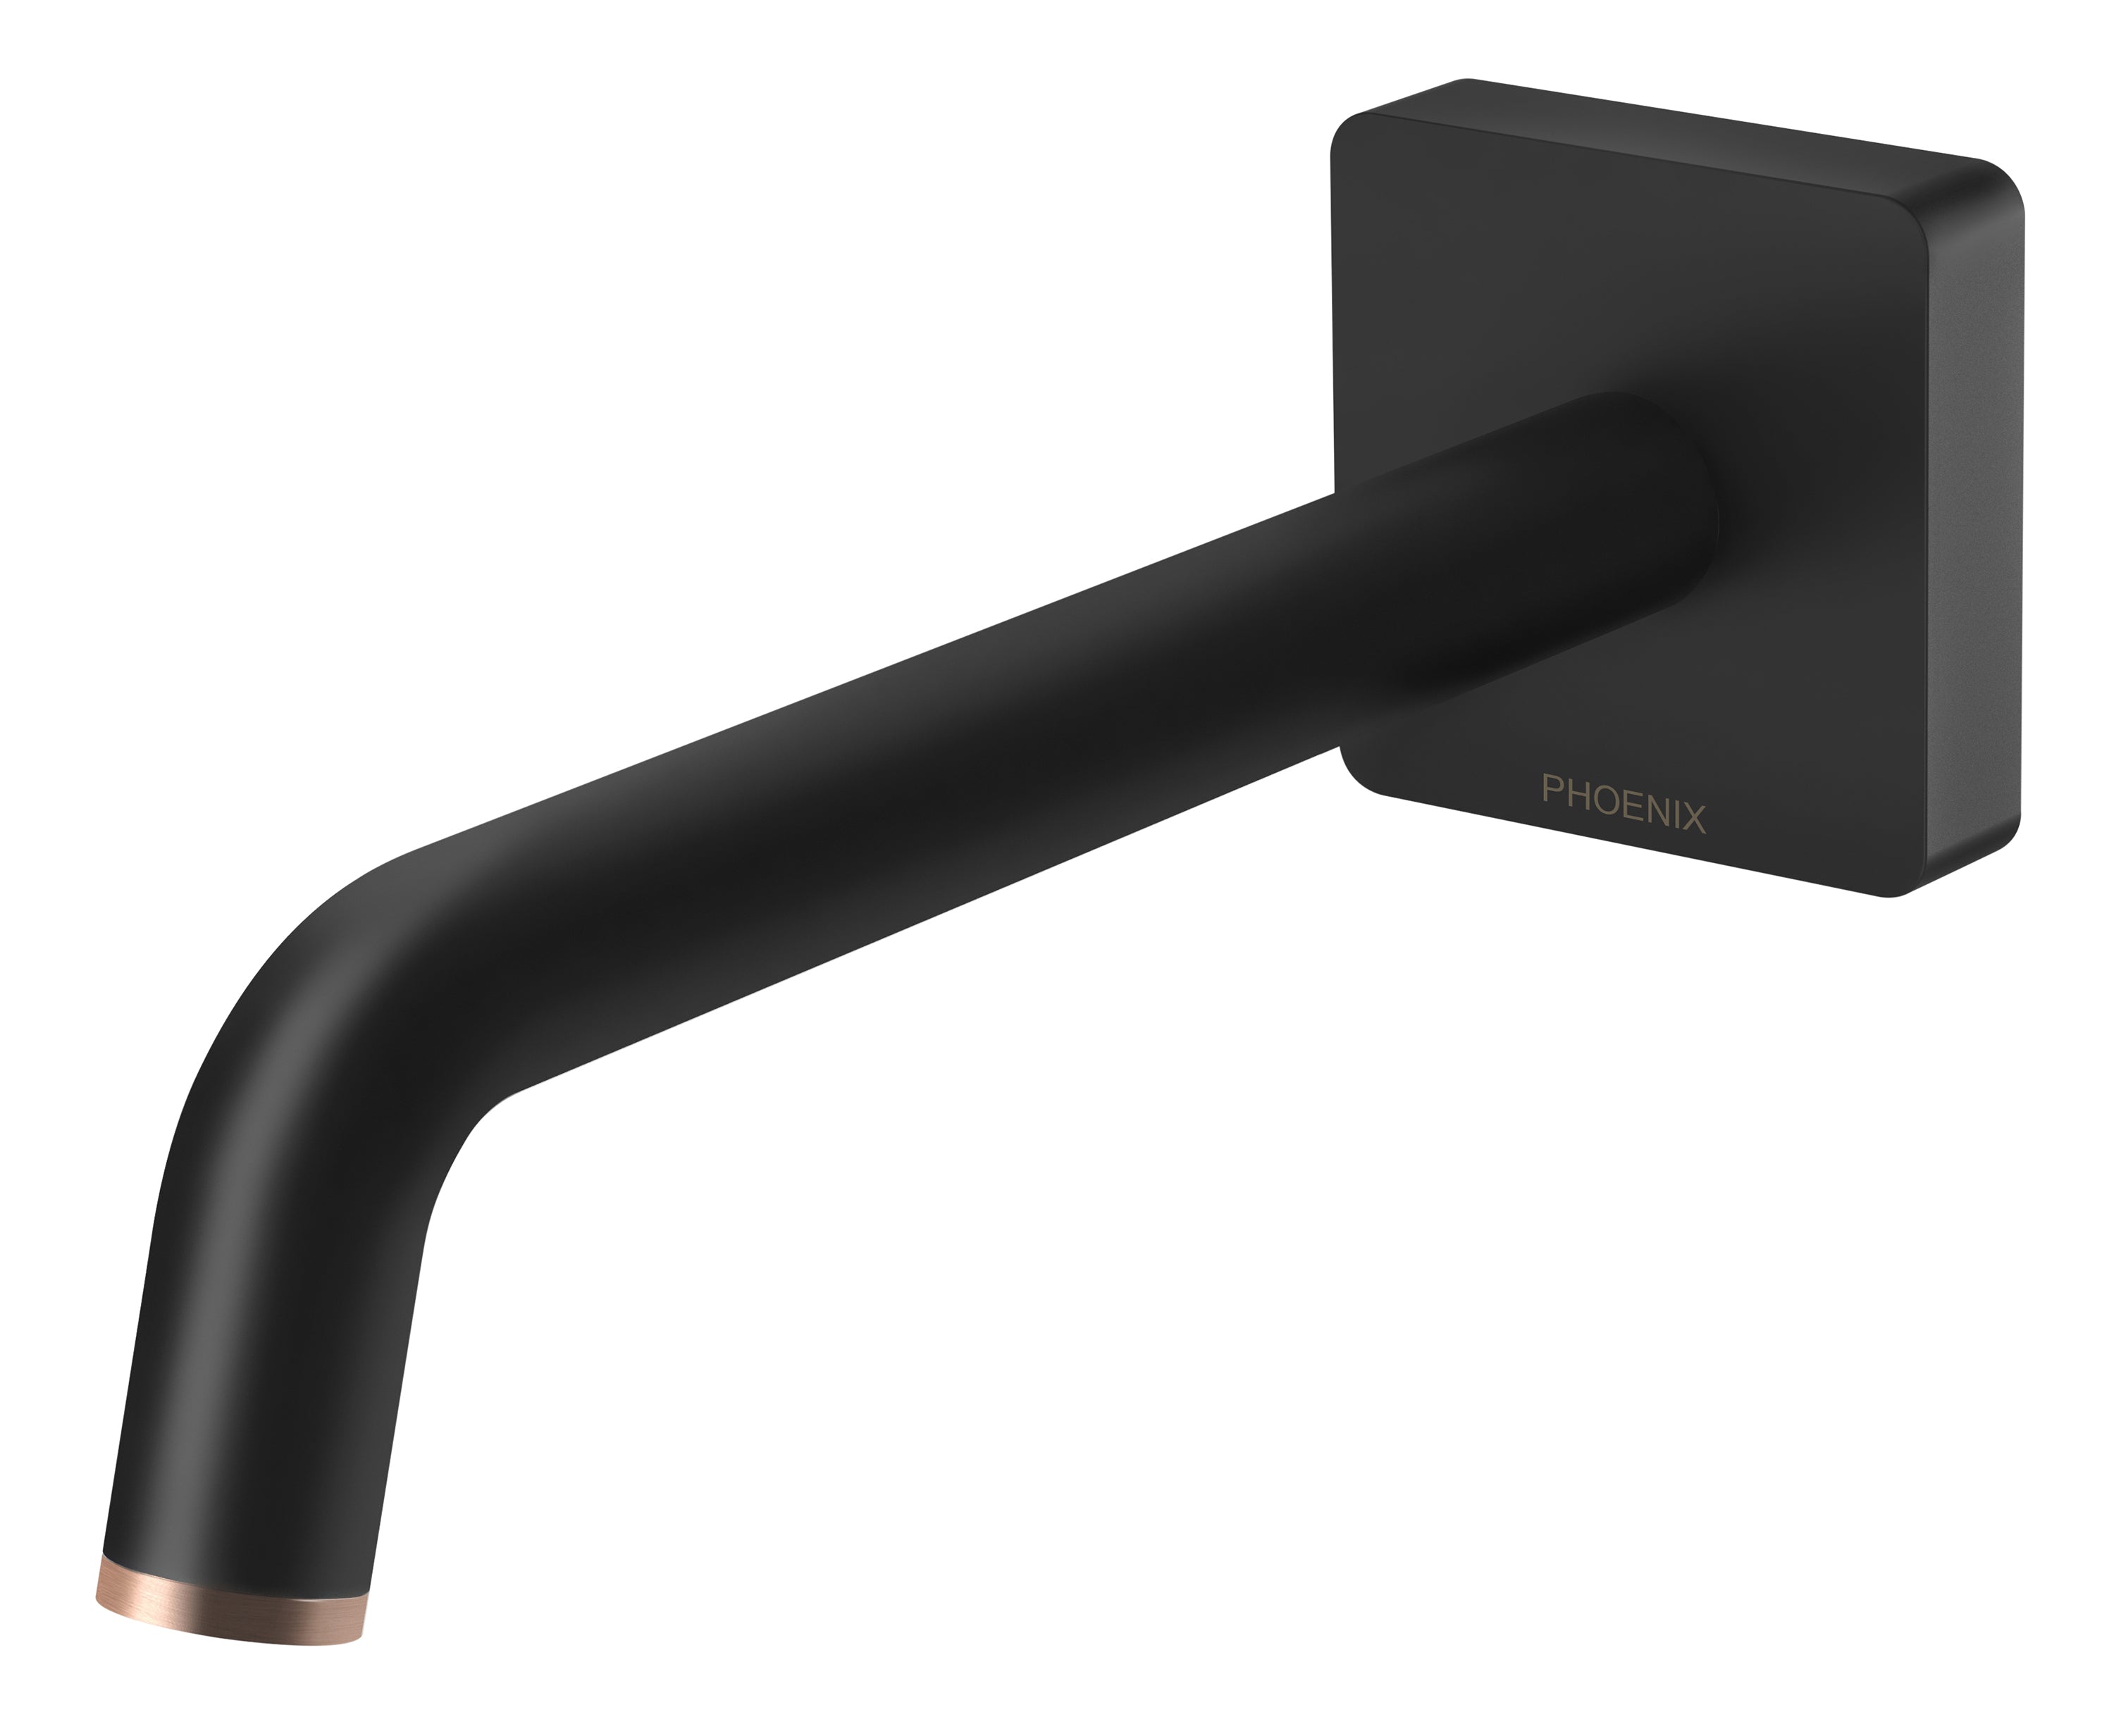 PHOENIX TOI WALL BATH OUTLET 180MM MATTE BLACK AND BRUSHED ROSE GOLD